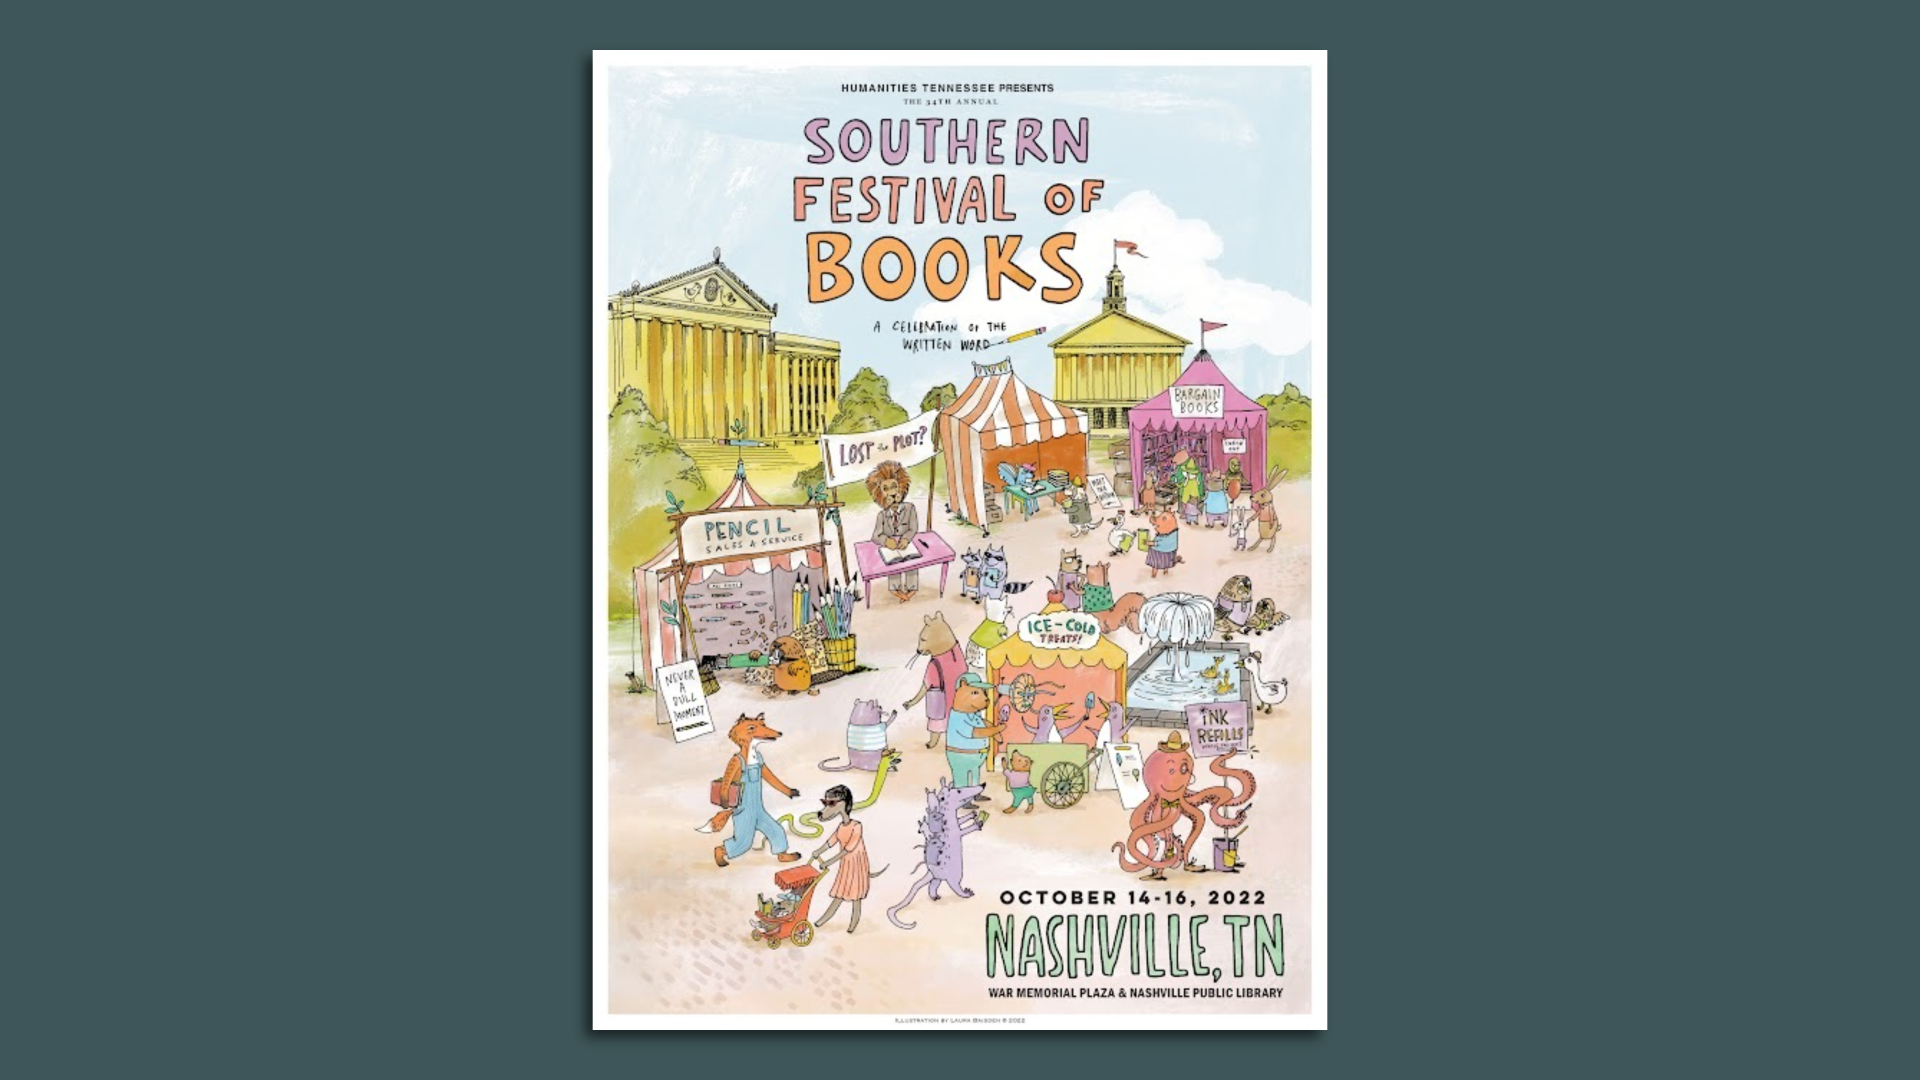 Event poster for the Southern Festival of Books